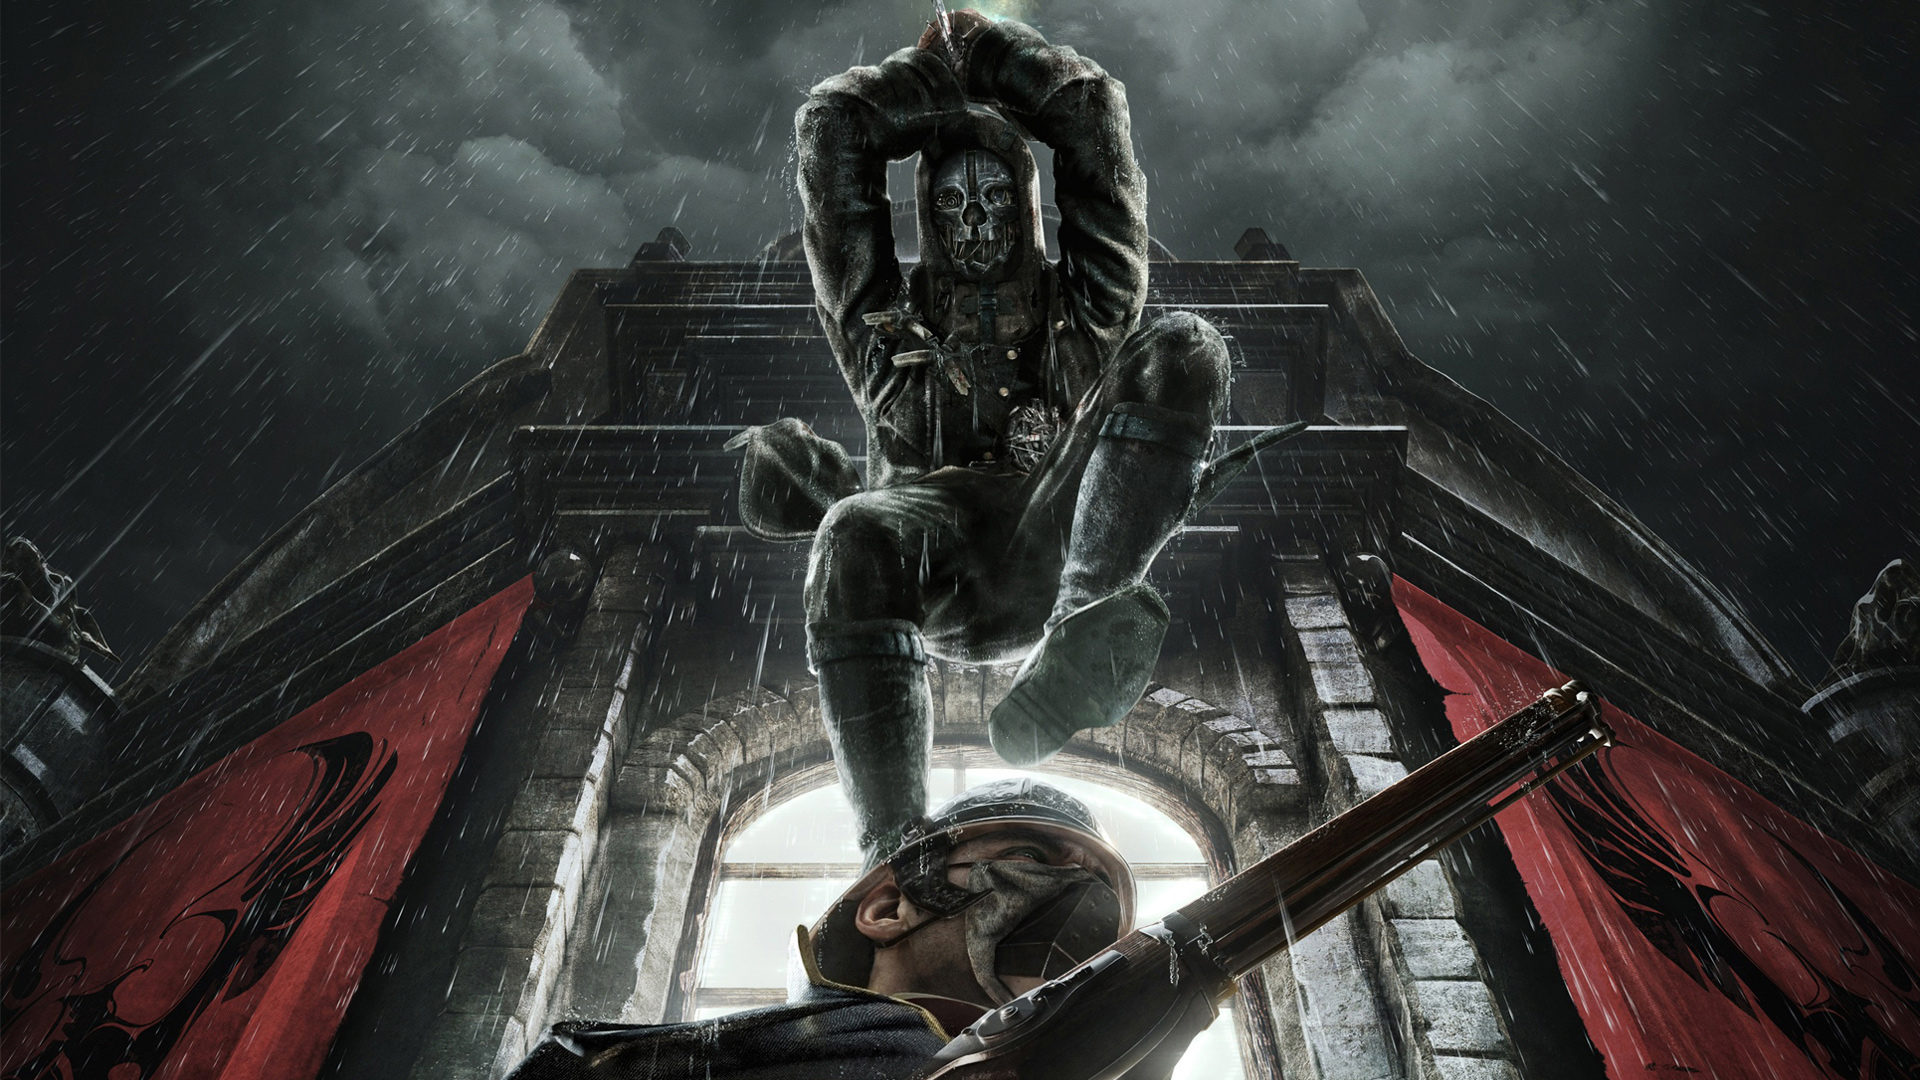 Corvo in his skull-shaped mask, leaping from the top of a building with his blade out. He is about to land on and stab a guard.